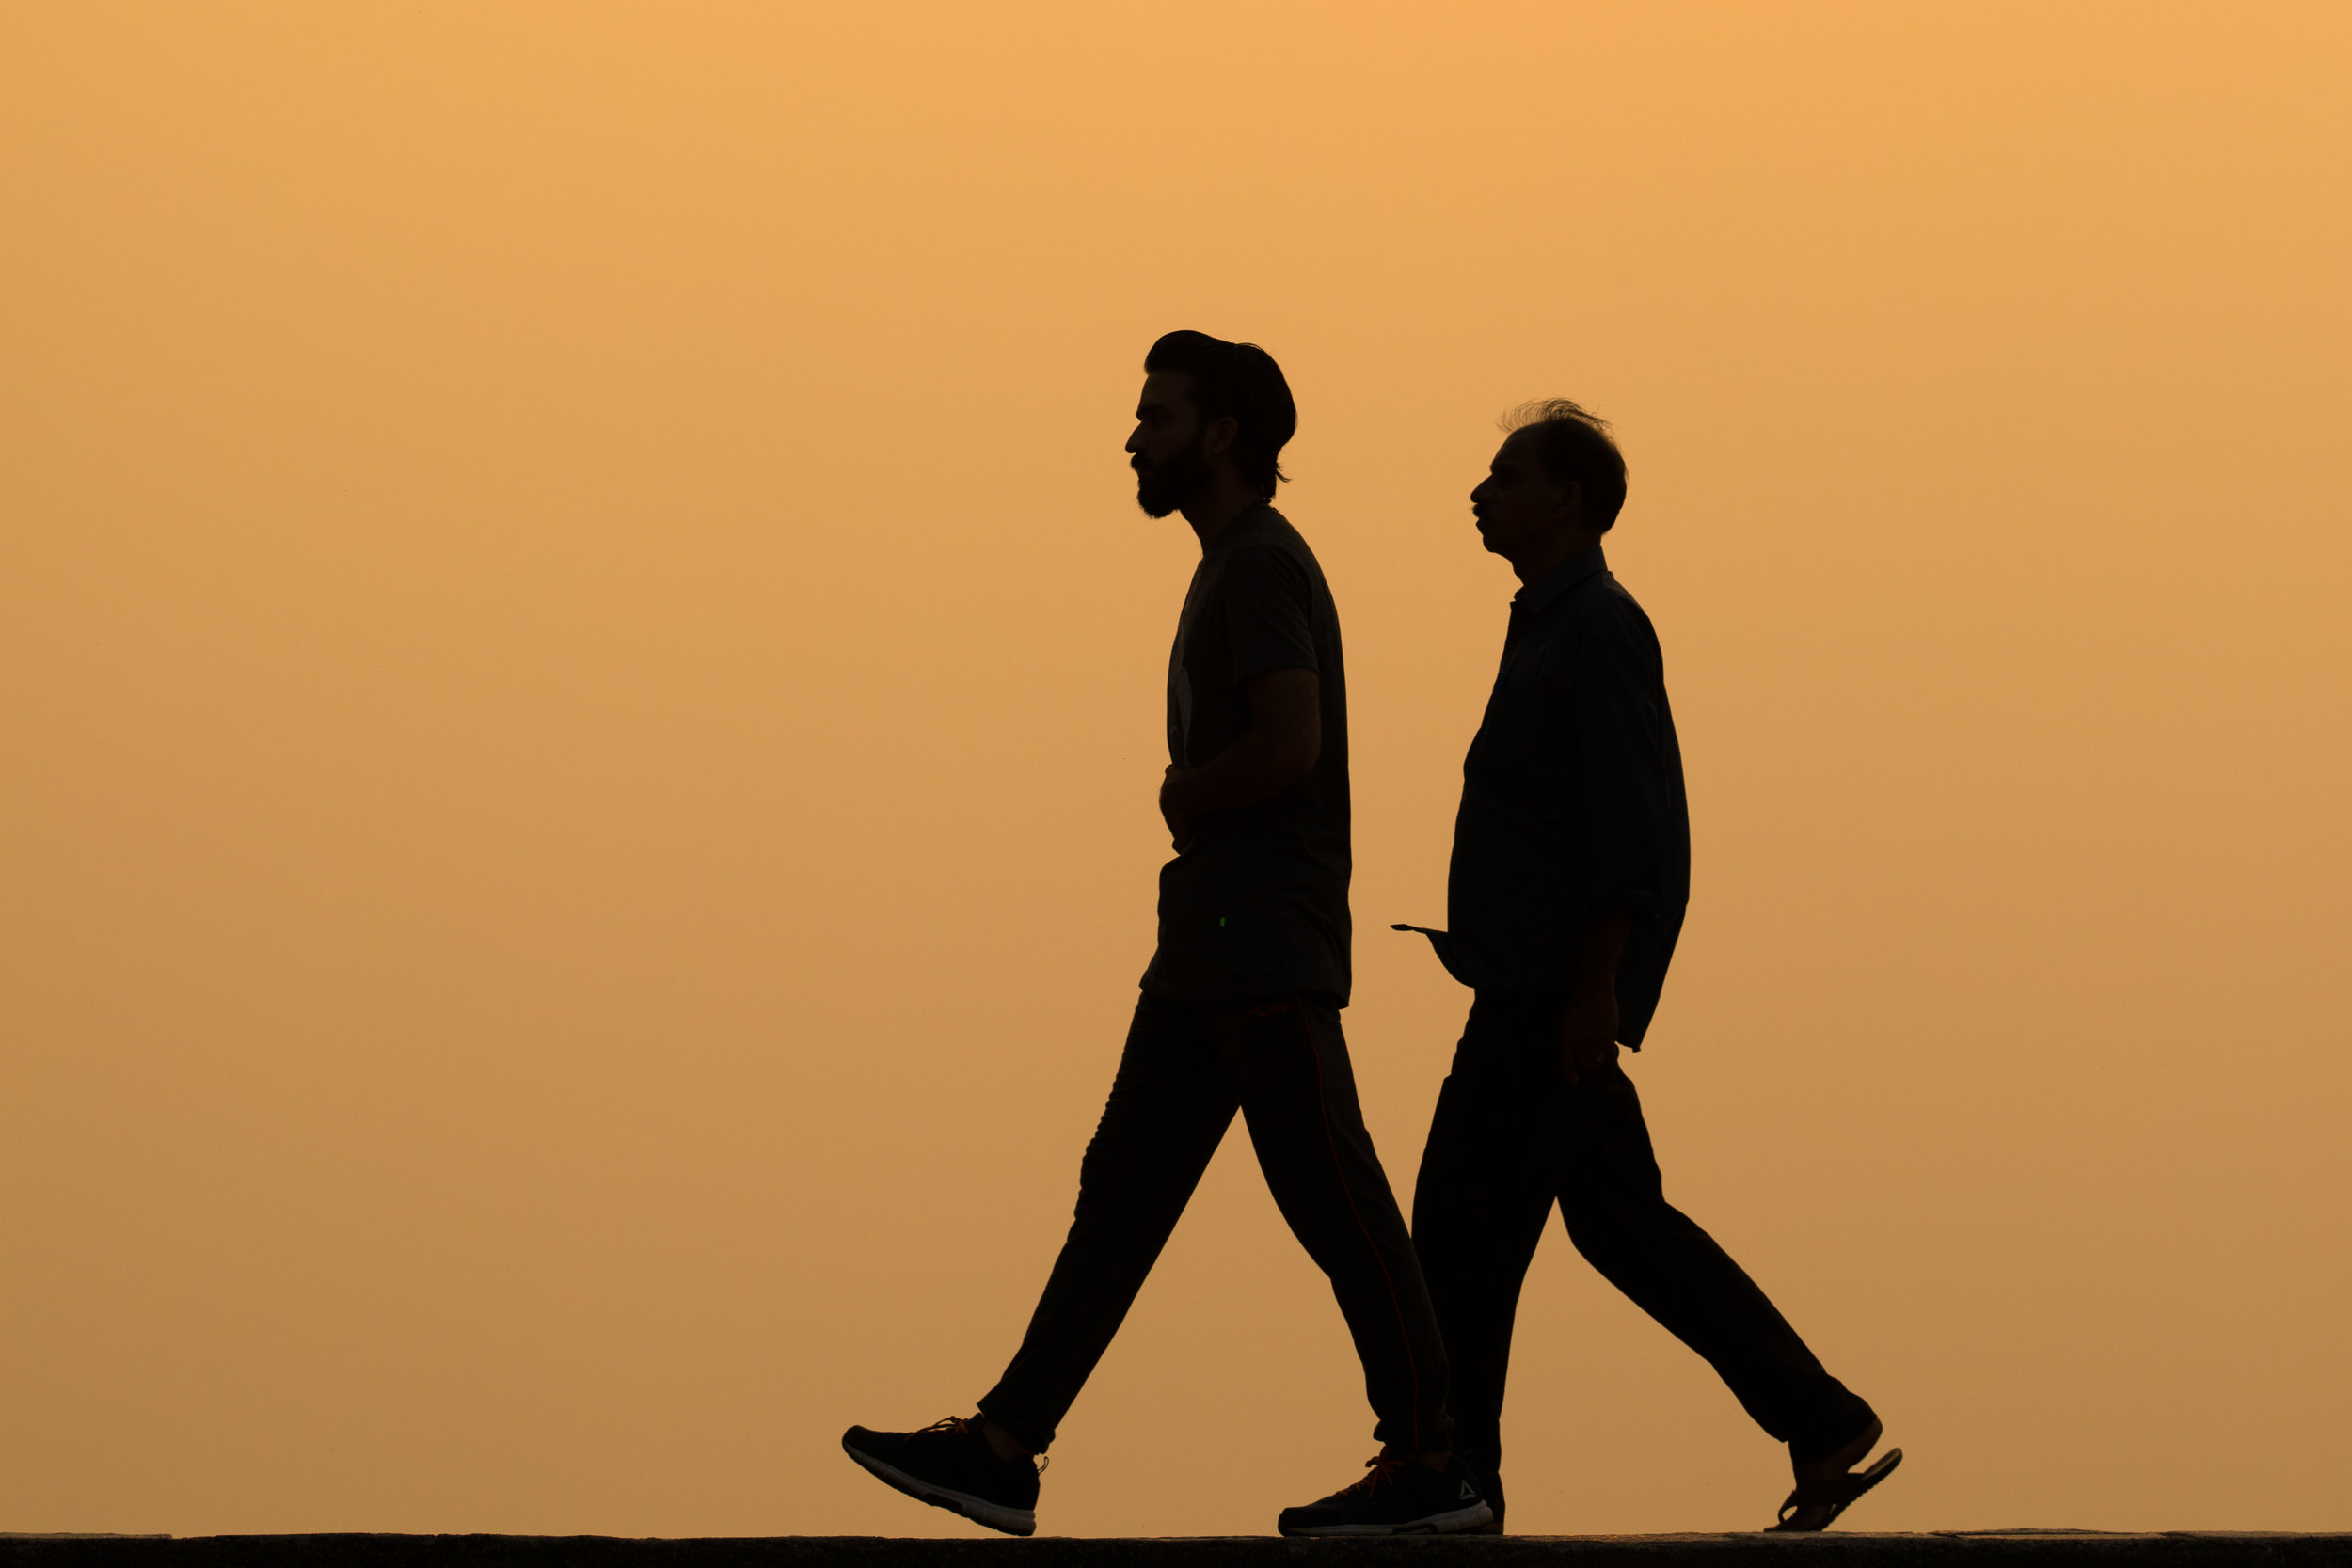 Silhouetted walkers at Sunset in Kochi, India.